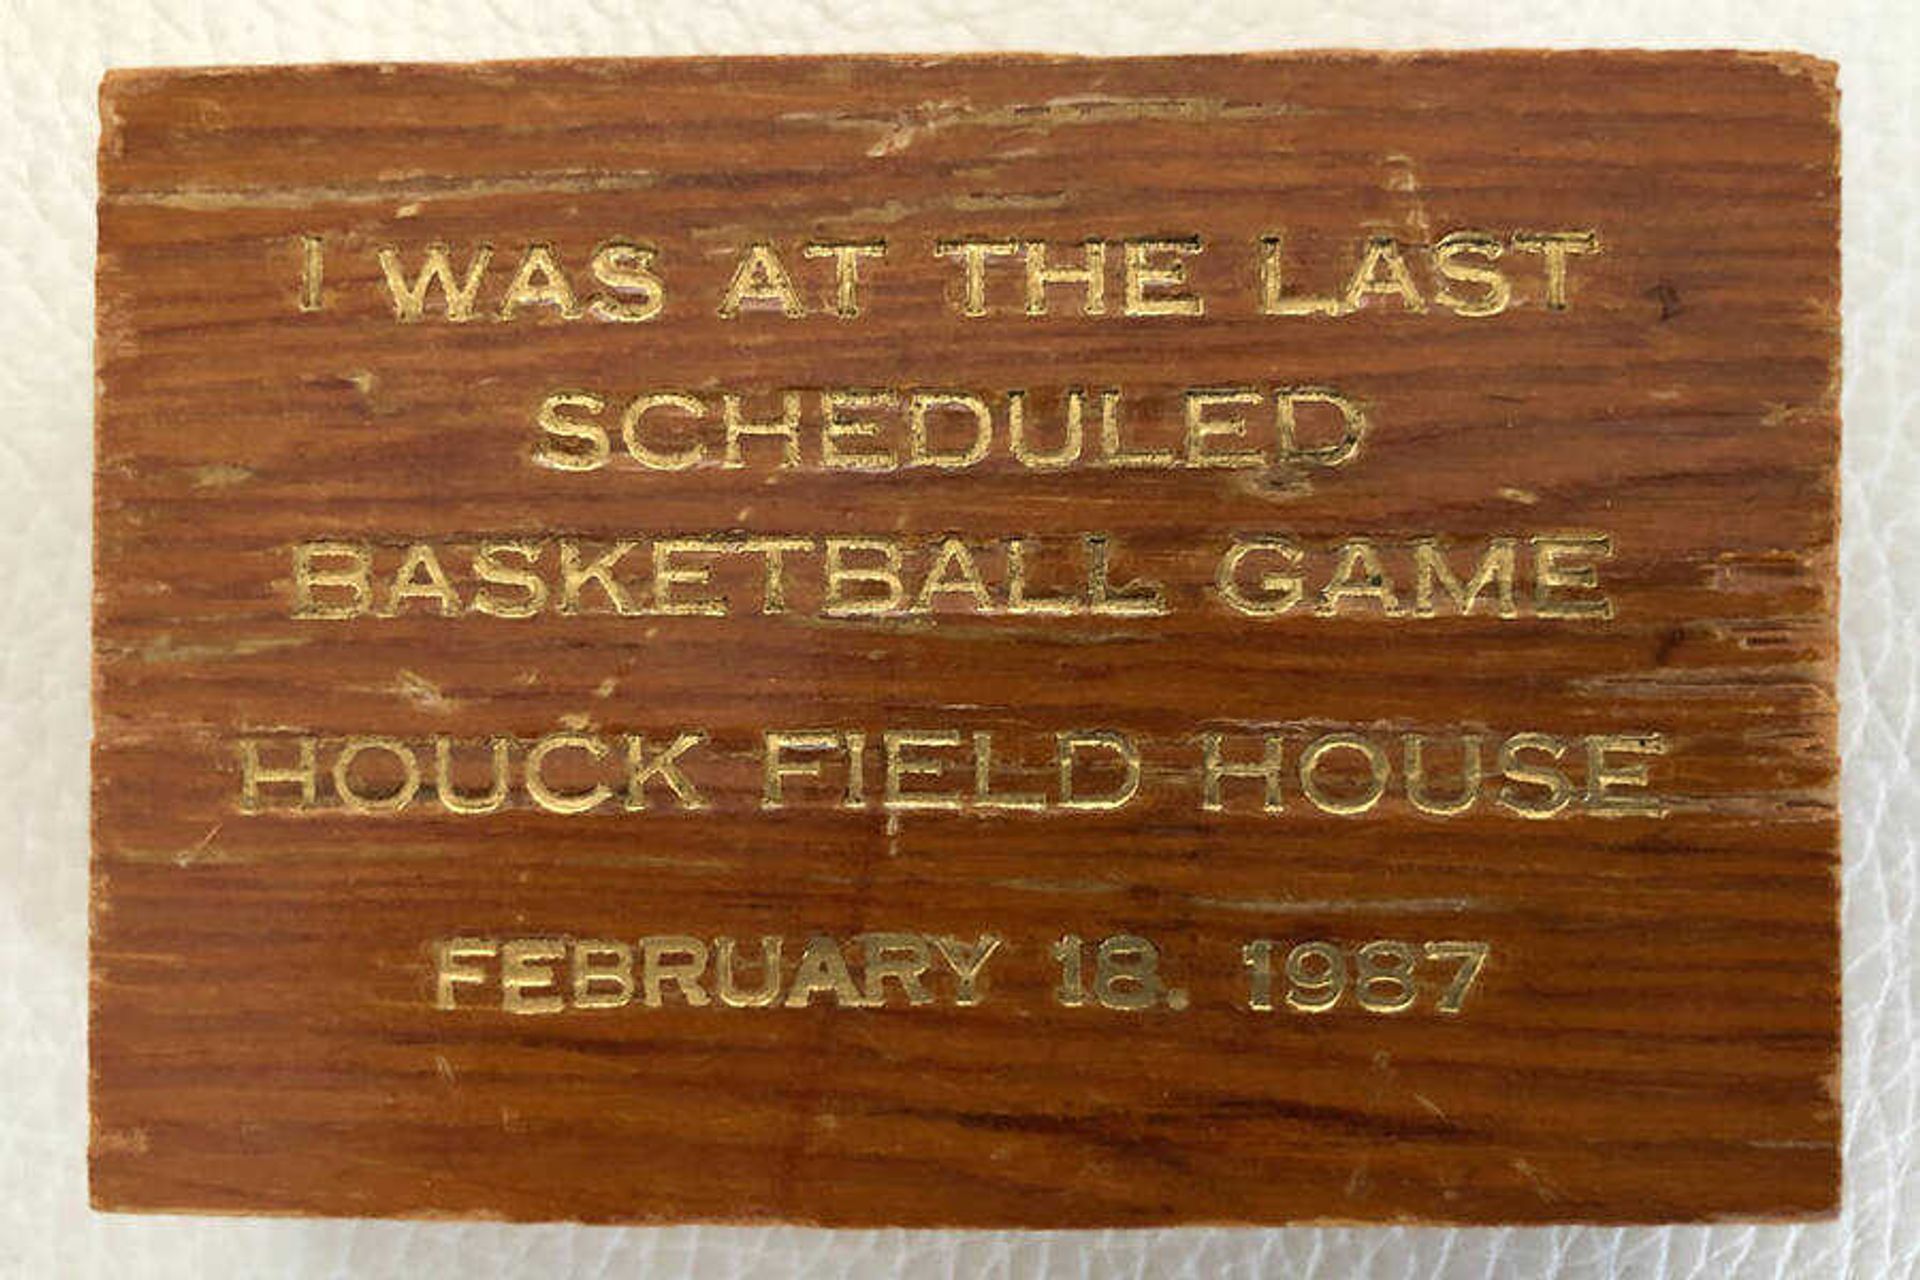 The 1986-87 season marked the last season played in Houck Field House. Members of the team were given a piece of the bleachers commemorating the last game at the field house.